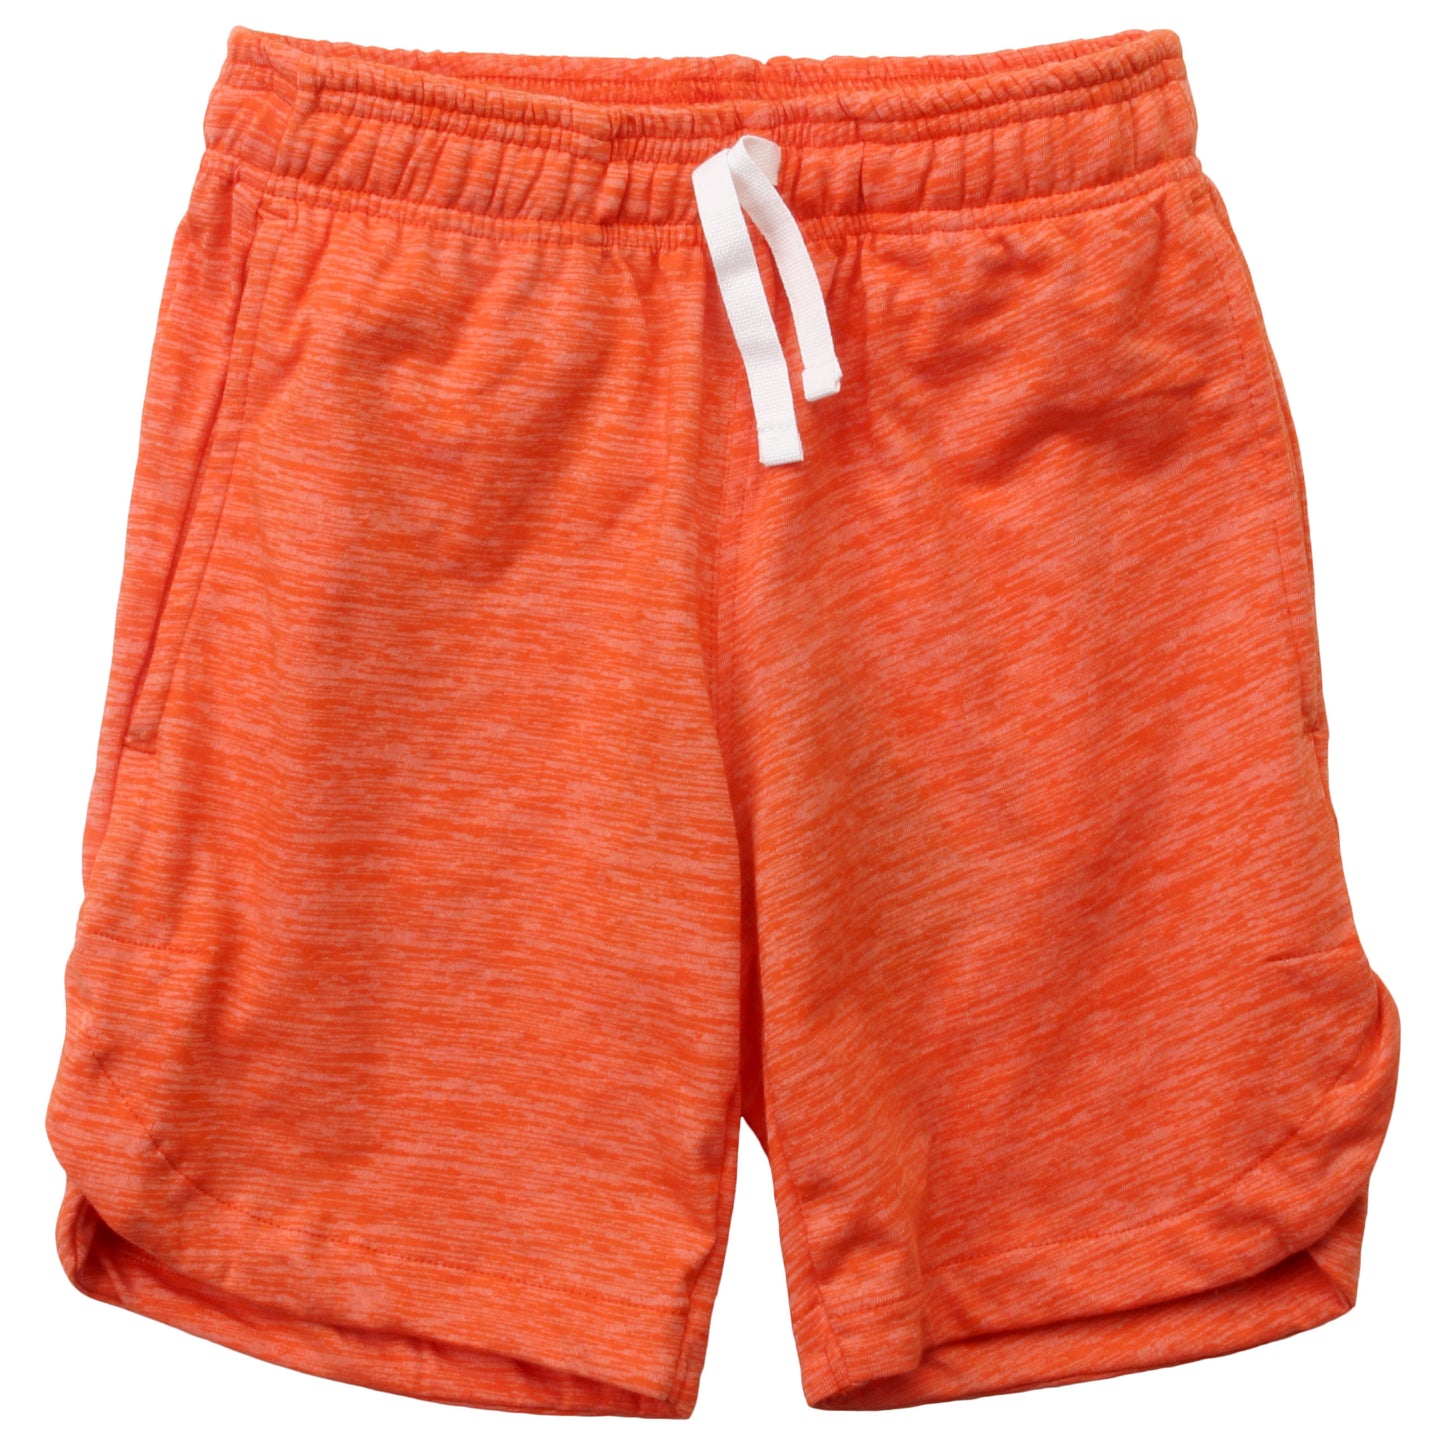 Wes & Willy Boy's Orange Cloudy Short